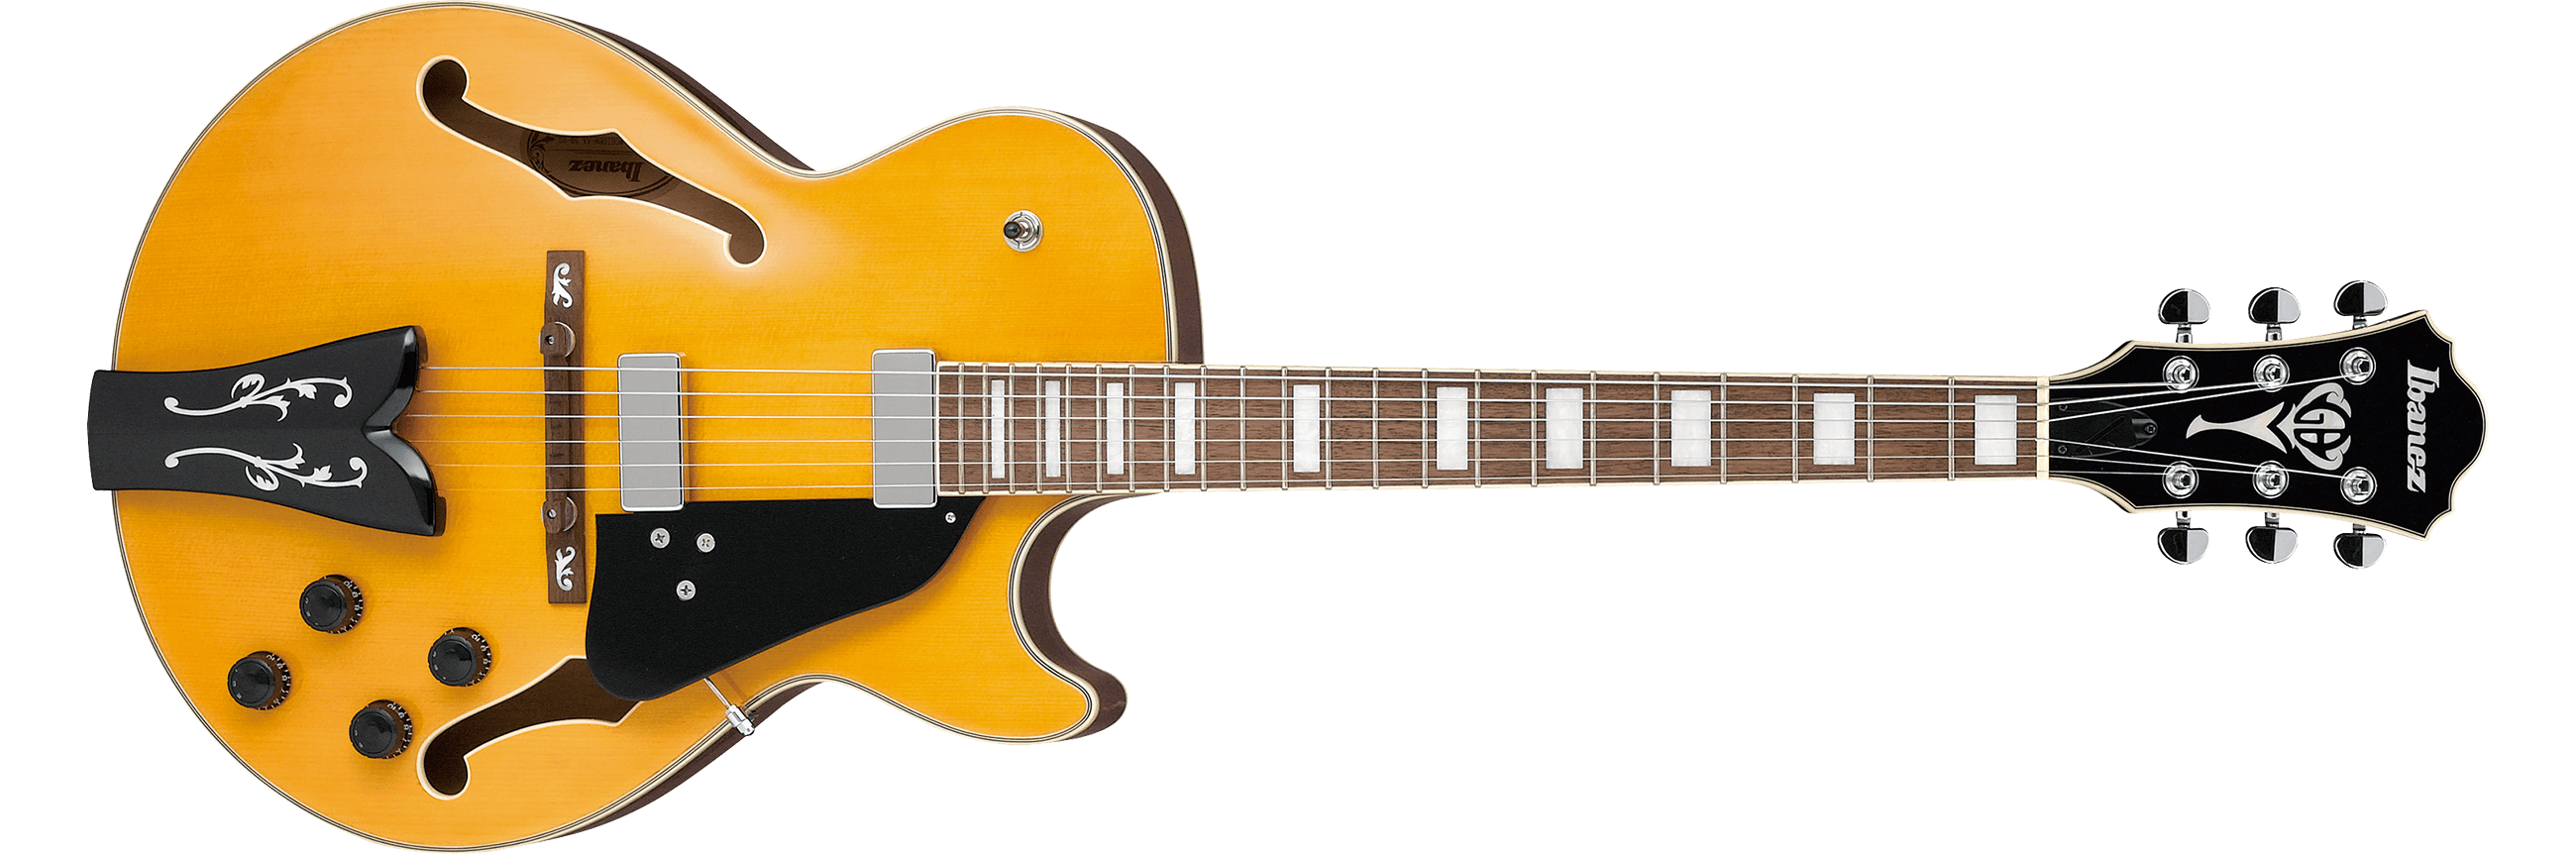 Ibanez GB10EM - George Benson Signature Hollow Body Electric Guitar - Antique Amber | Jack's On Queen